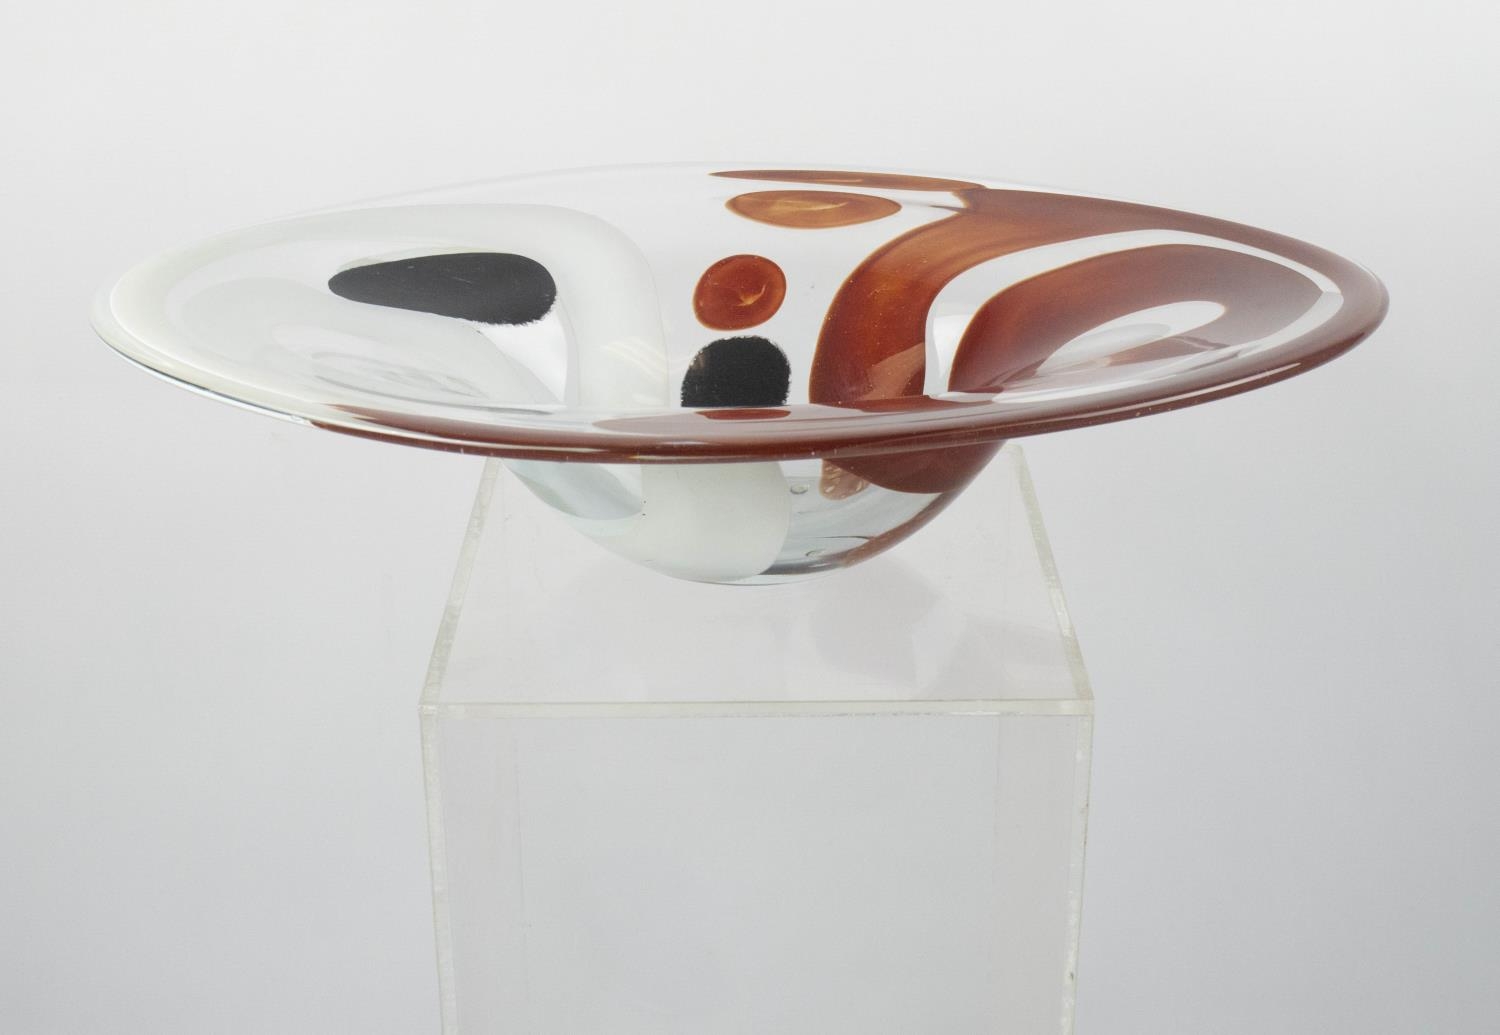 ART GLASS BOWL, late 20th century shaped with red, white and black design, 52cm L x 39cm W x 13cm H.